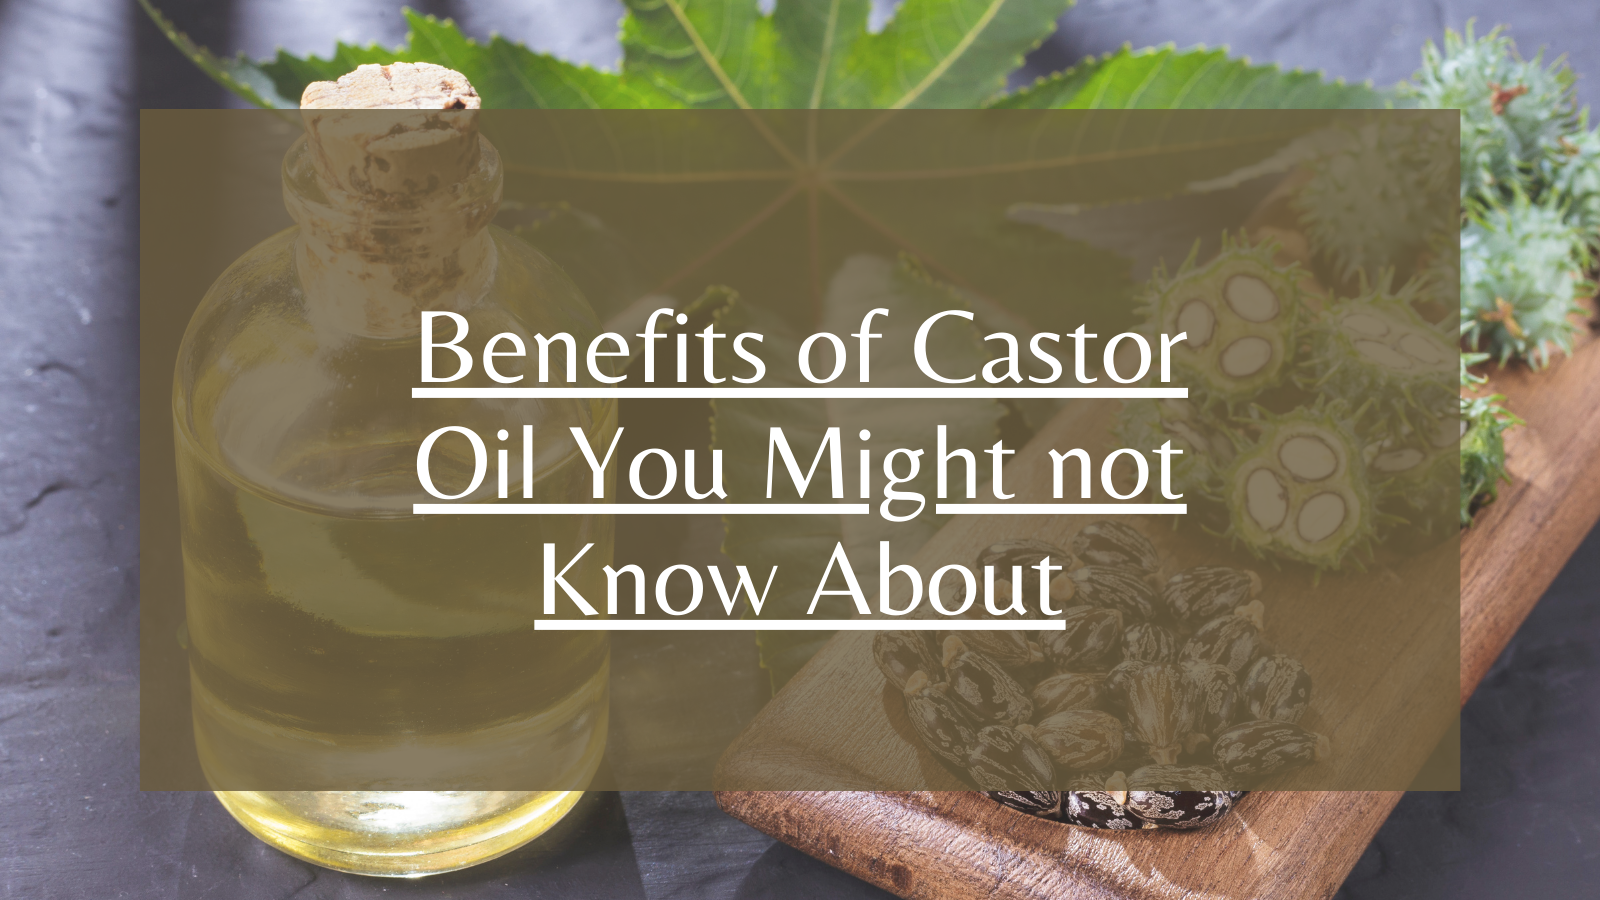 Benefits of Castor Oil You Might not Know About